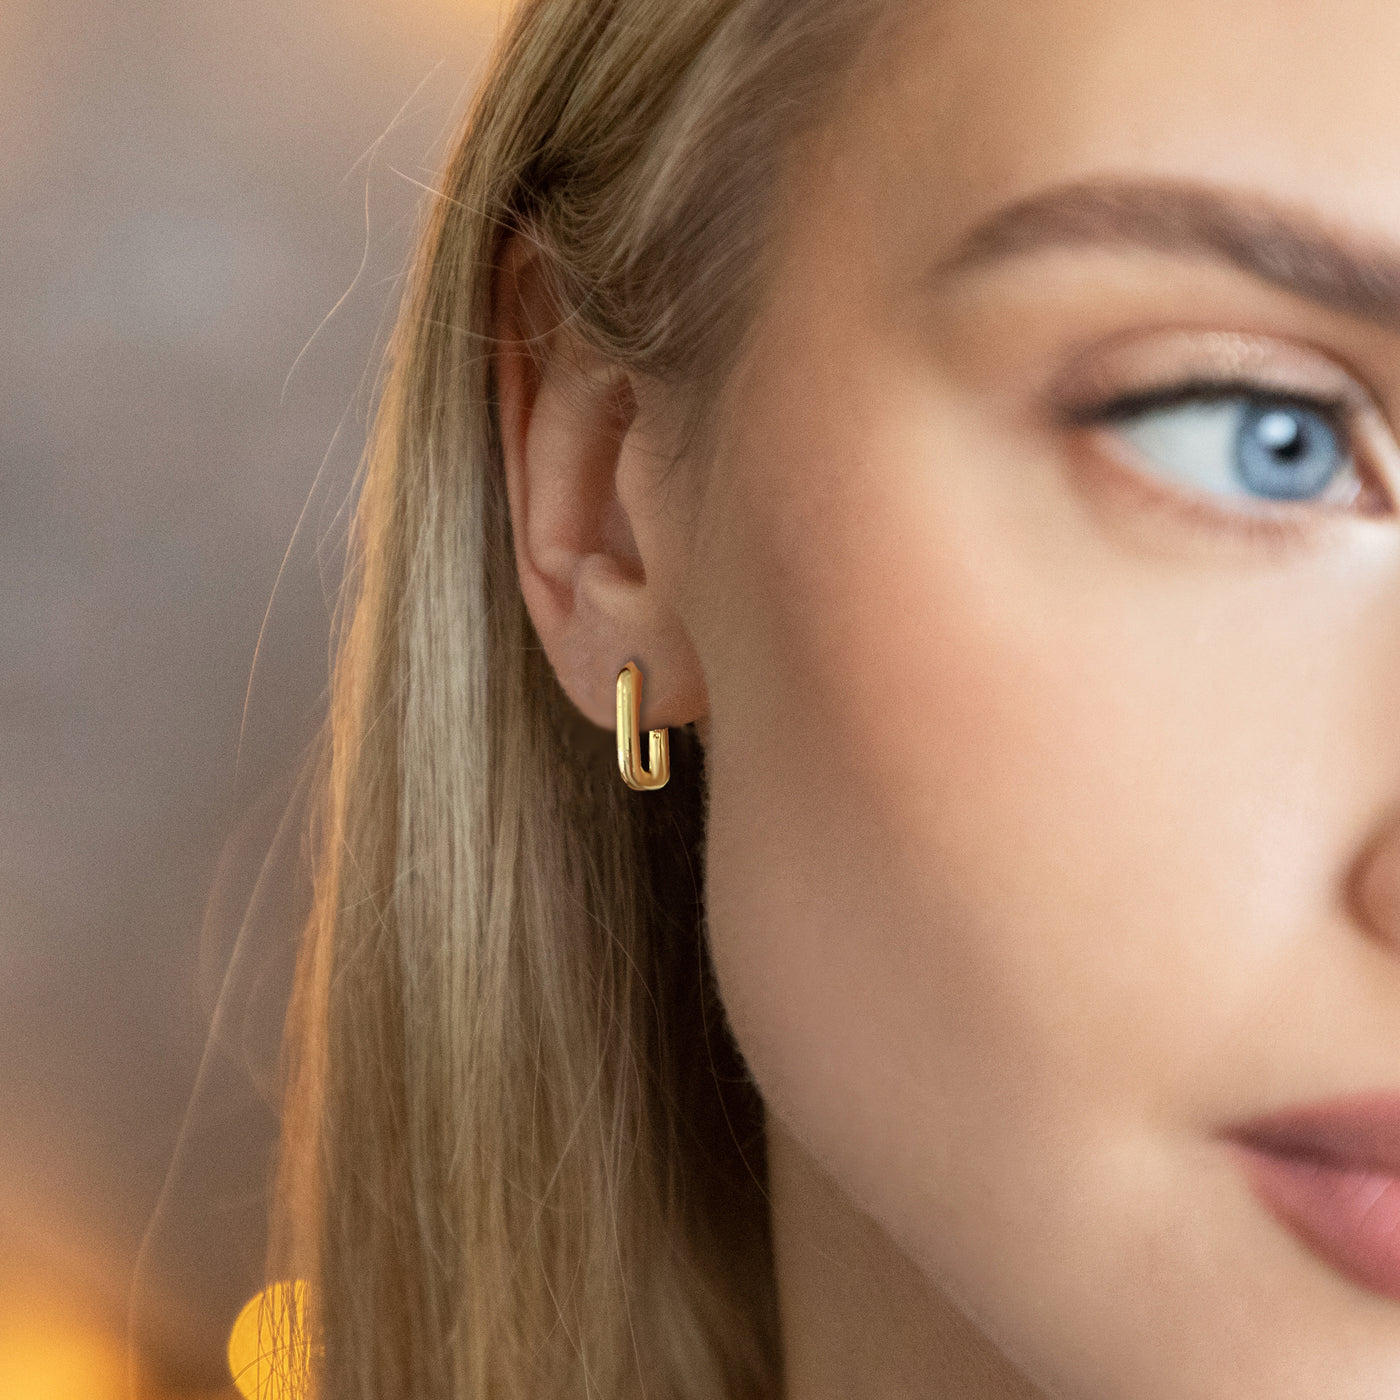 Interlinking Square Hoop Earrings, Gold Plated